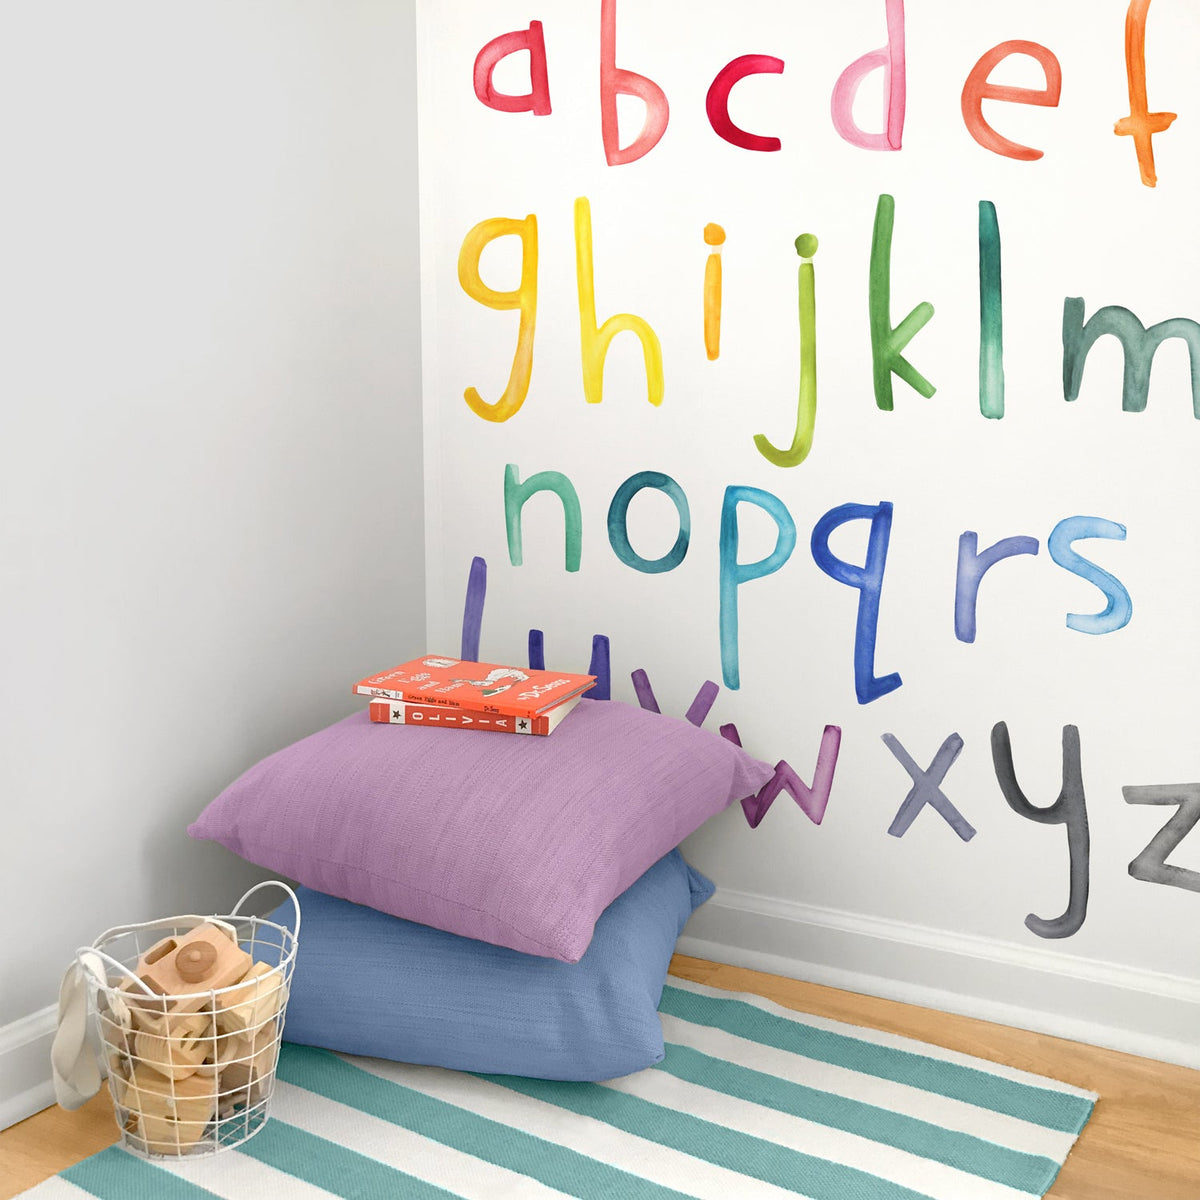 Painted Wooden Alphabet Letters Set, Nursery Wall Decor, Playroom Letters,  Wall Hanging, Nursery Decor, Alphabet Wall, ABC Wall, Mixed, Painted